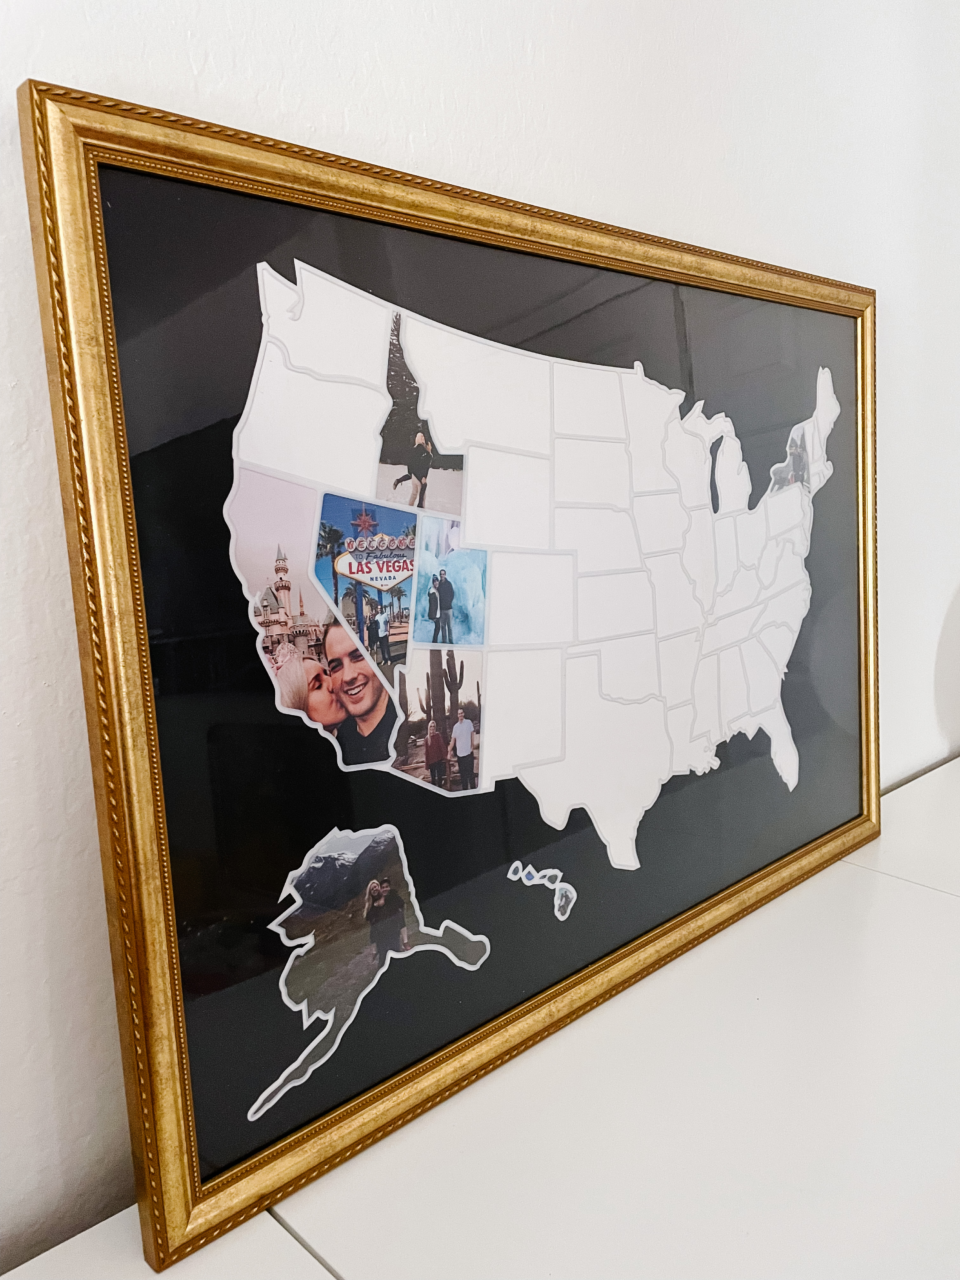 Genius Airbnb Design Tips: Framed map of the USA